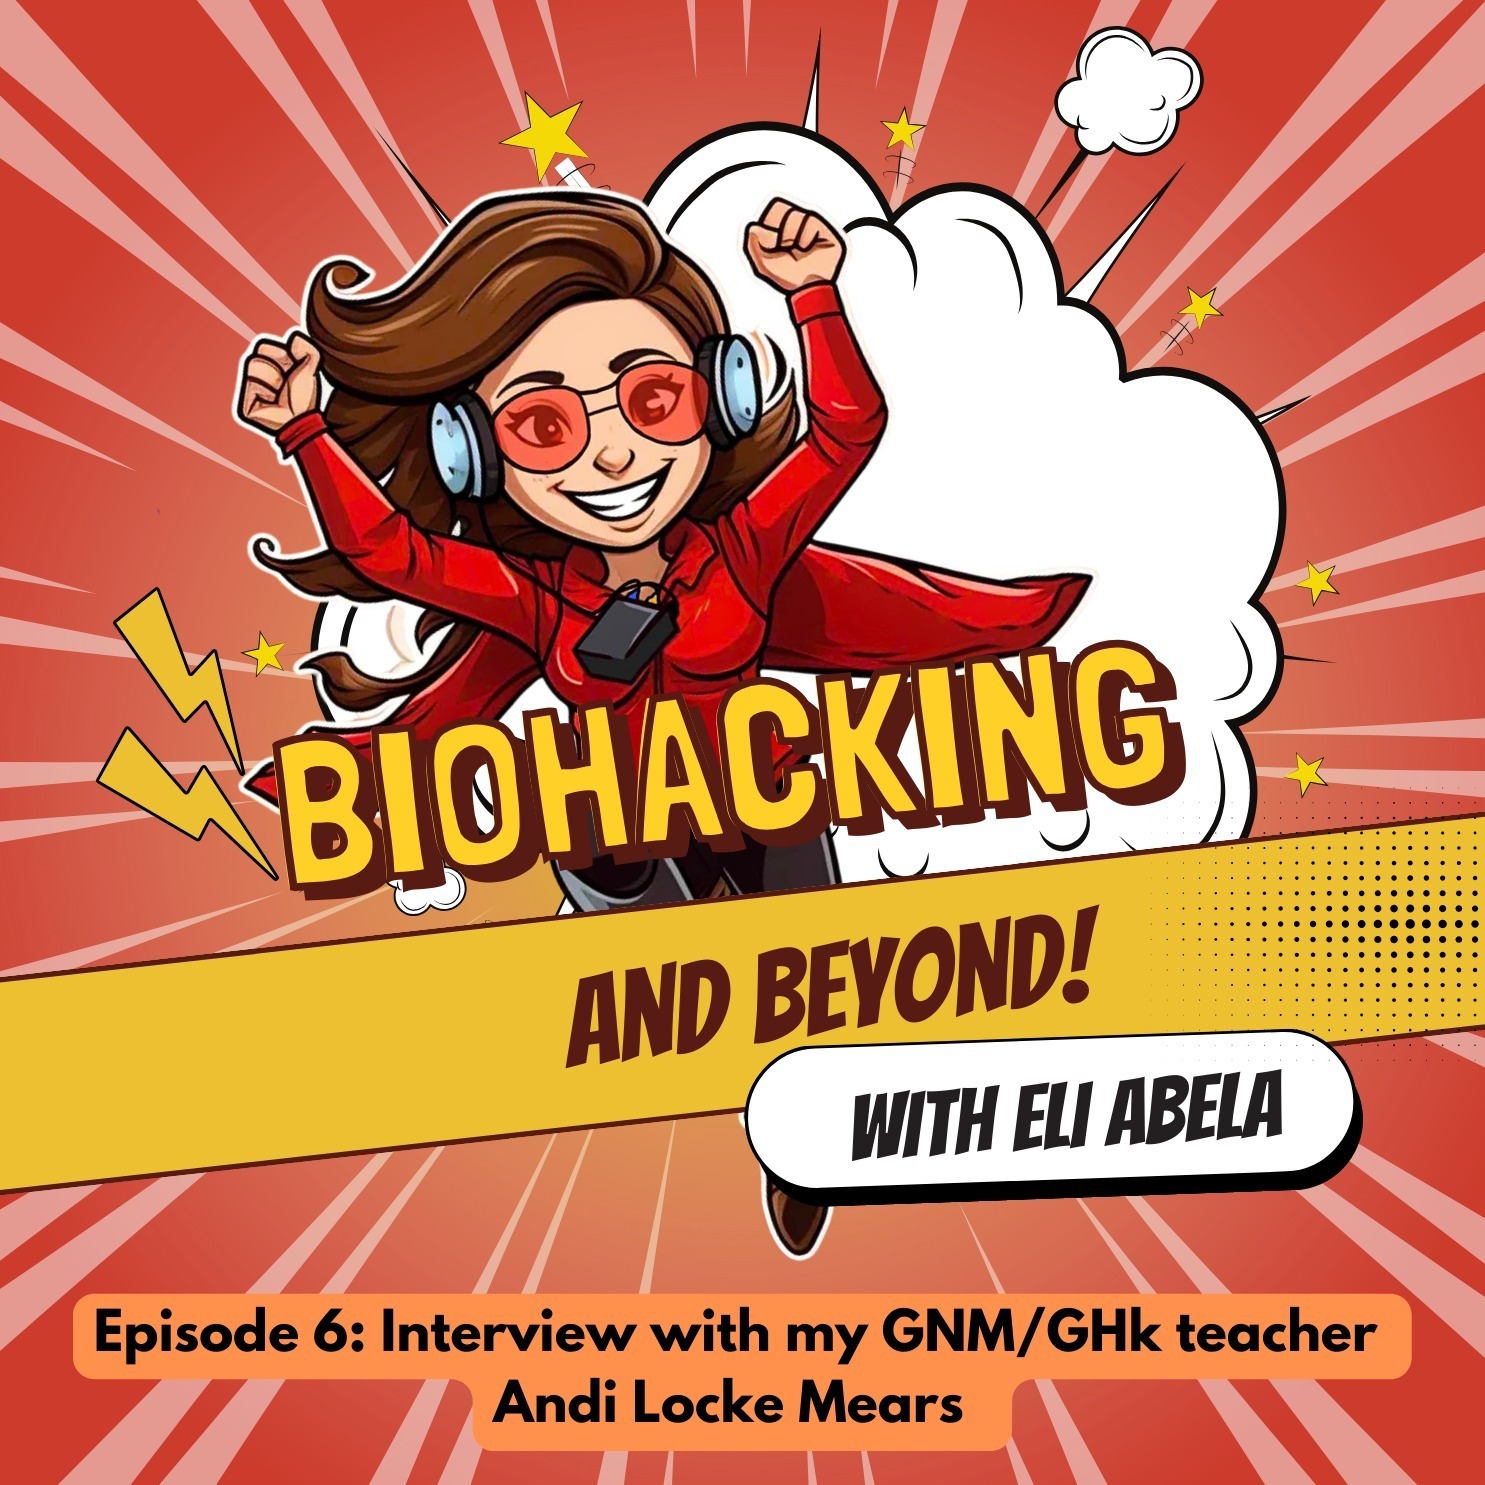 Episode 6: Interview With My GNM/GHk teacher Andi Locke Mears